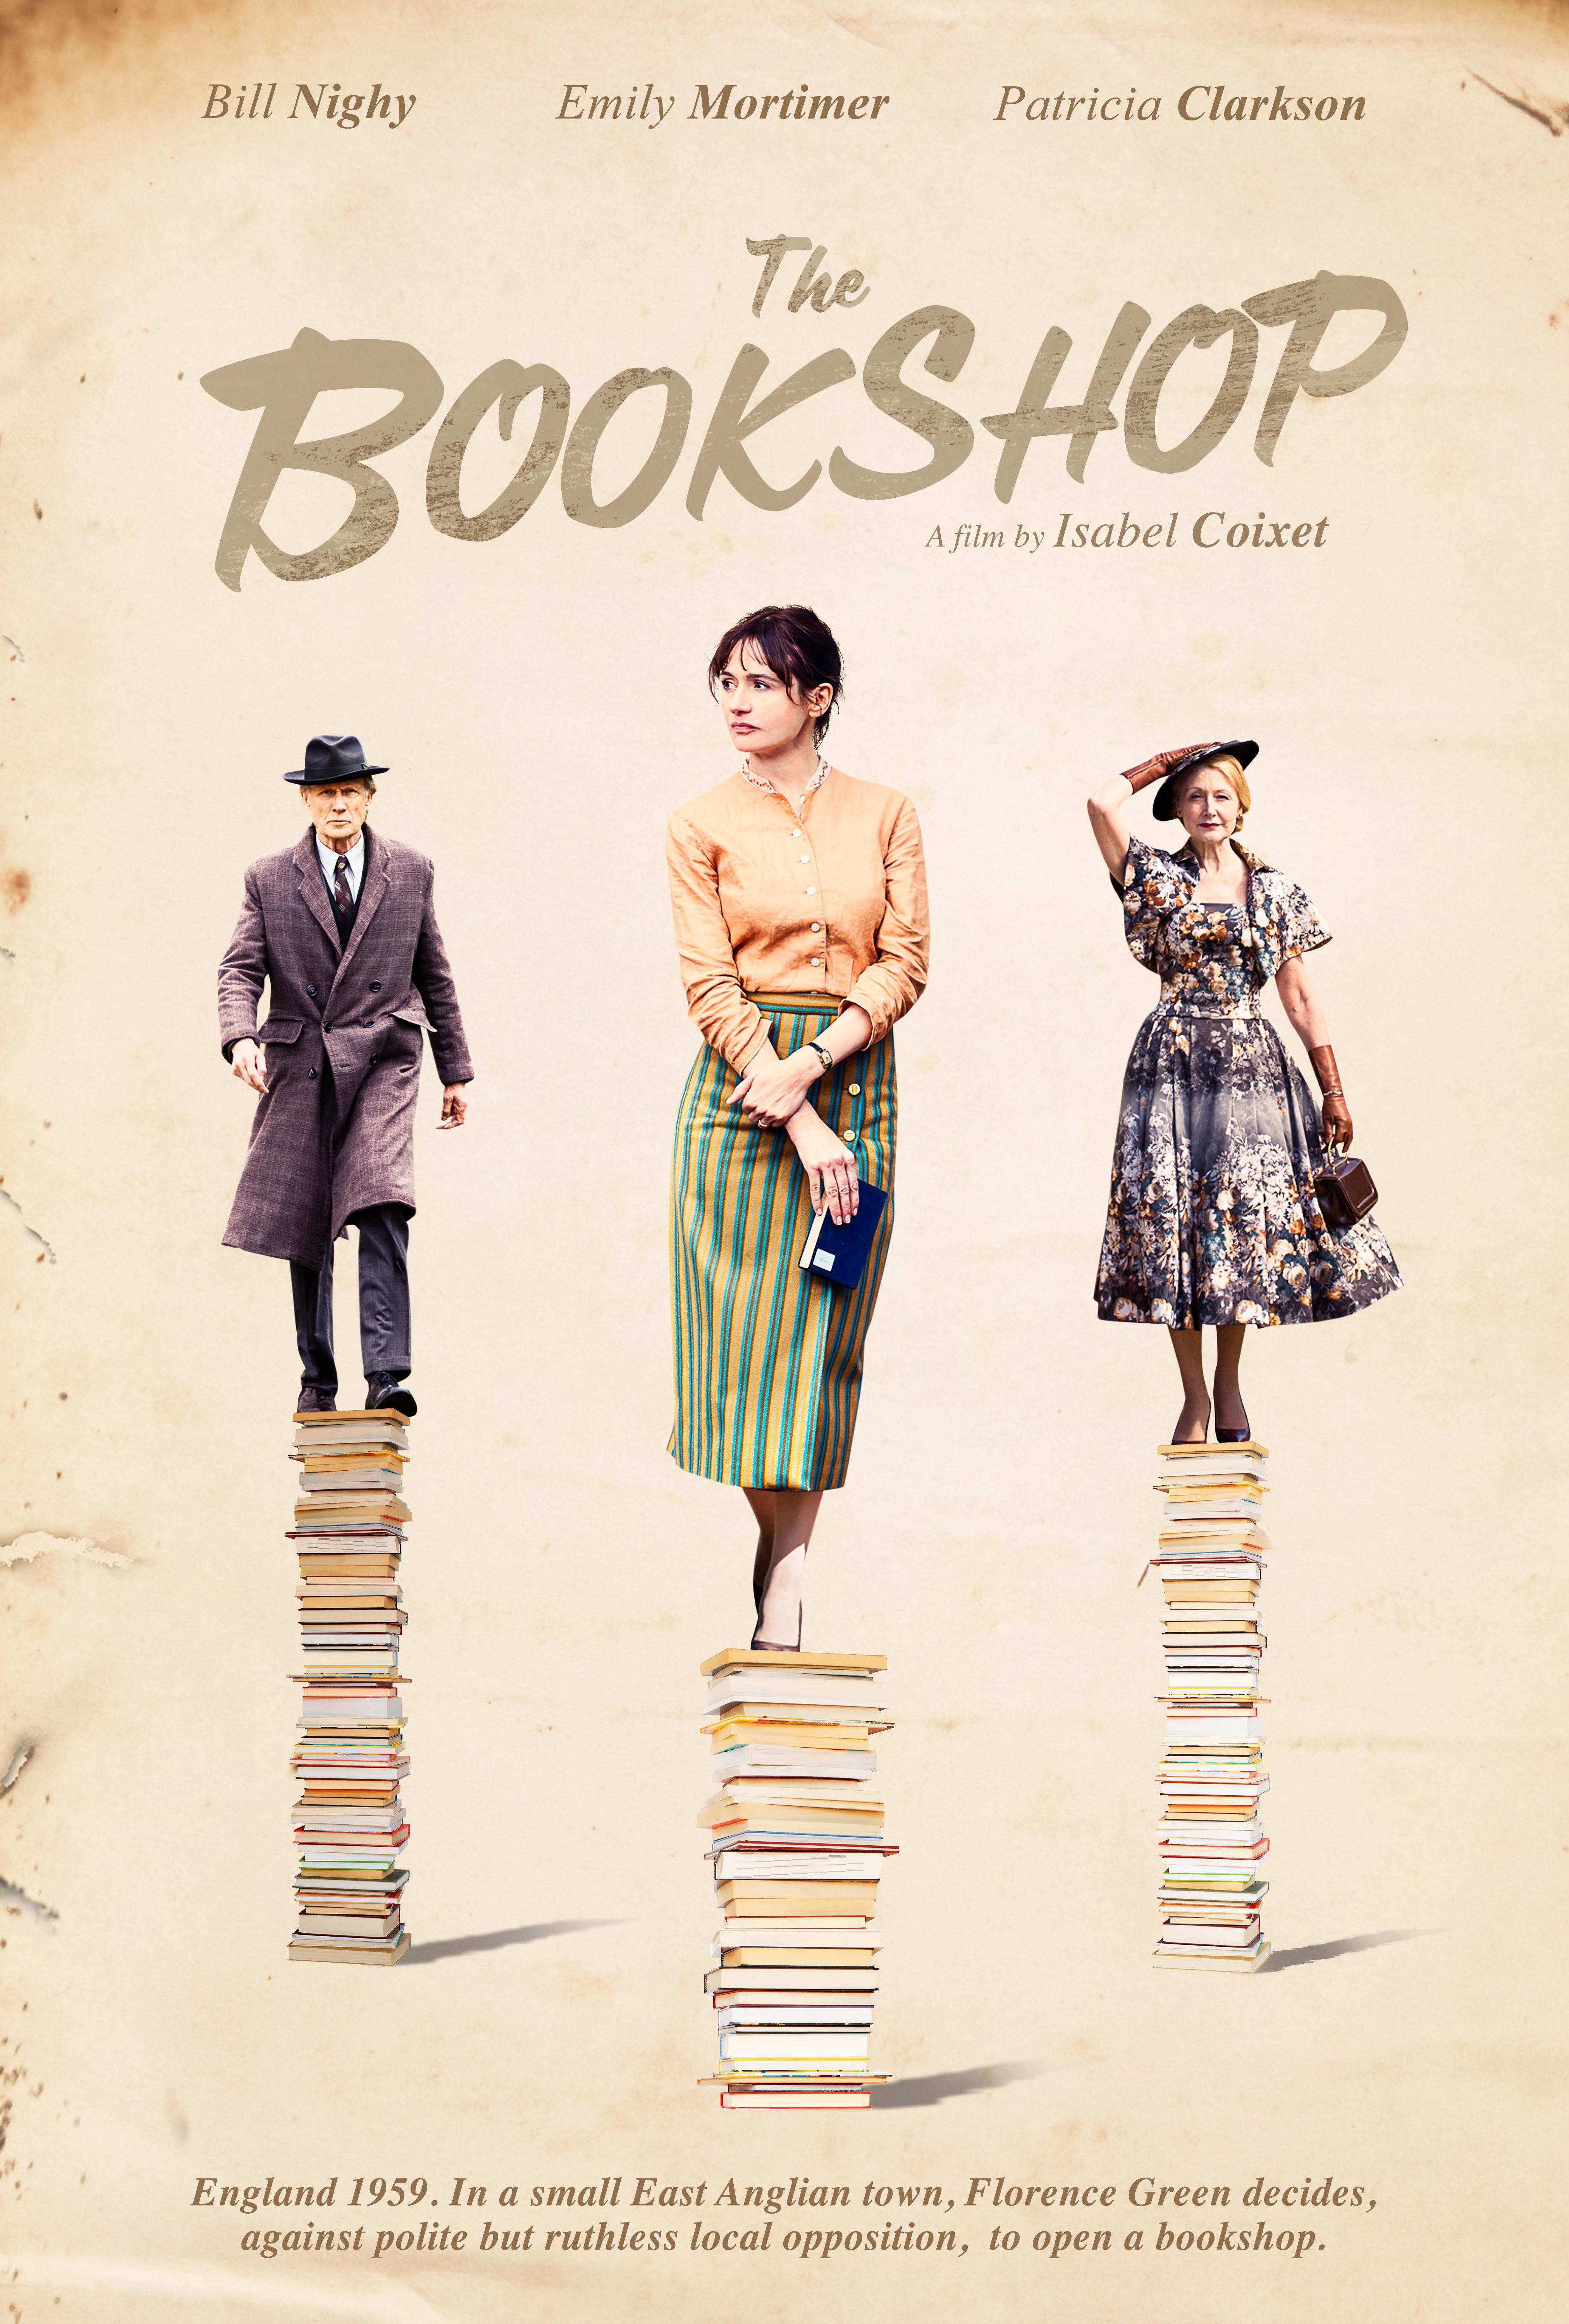 Graphic image of the poster for The Bookshop